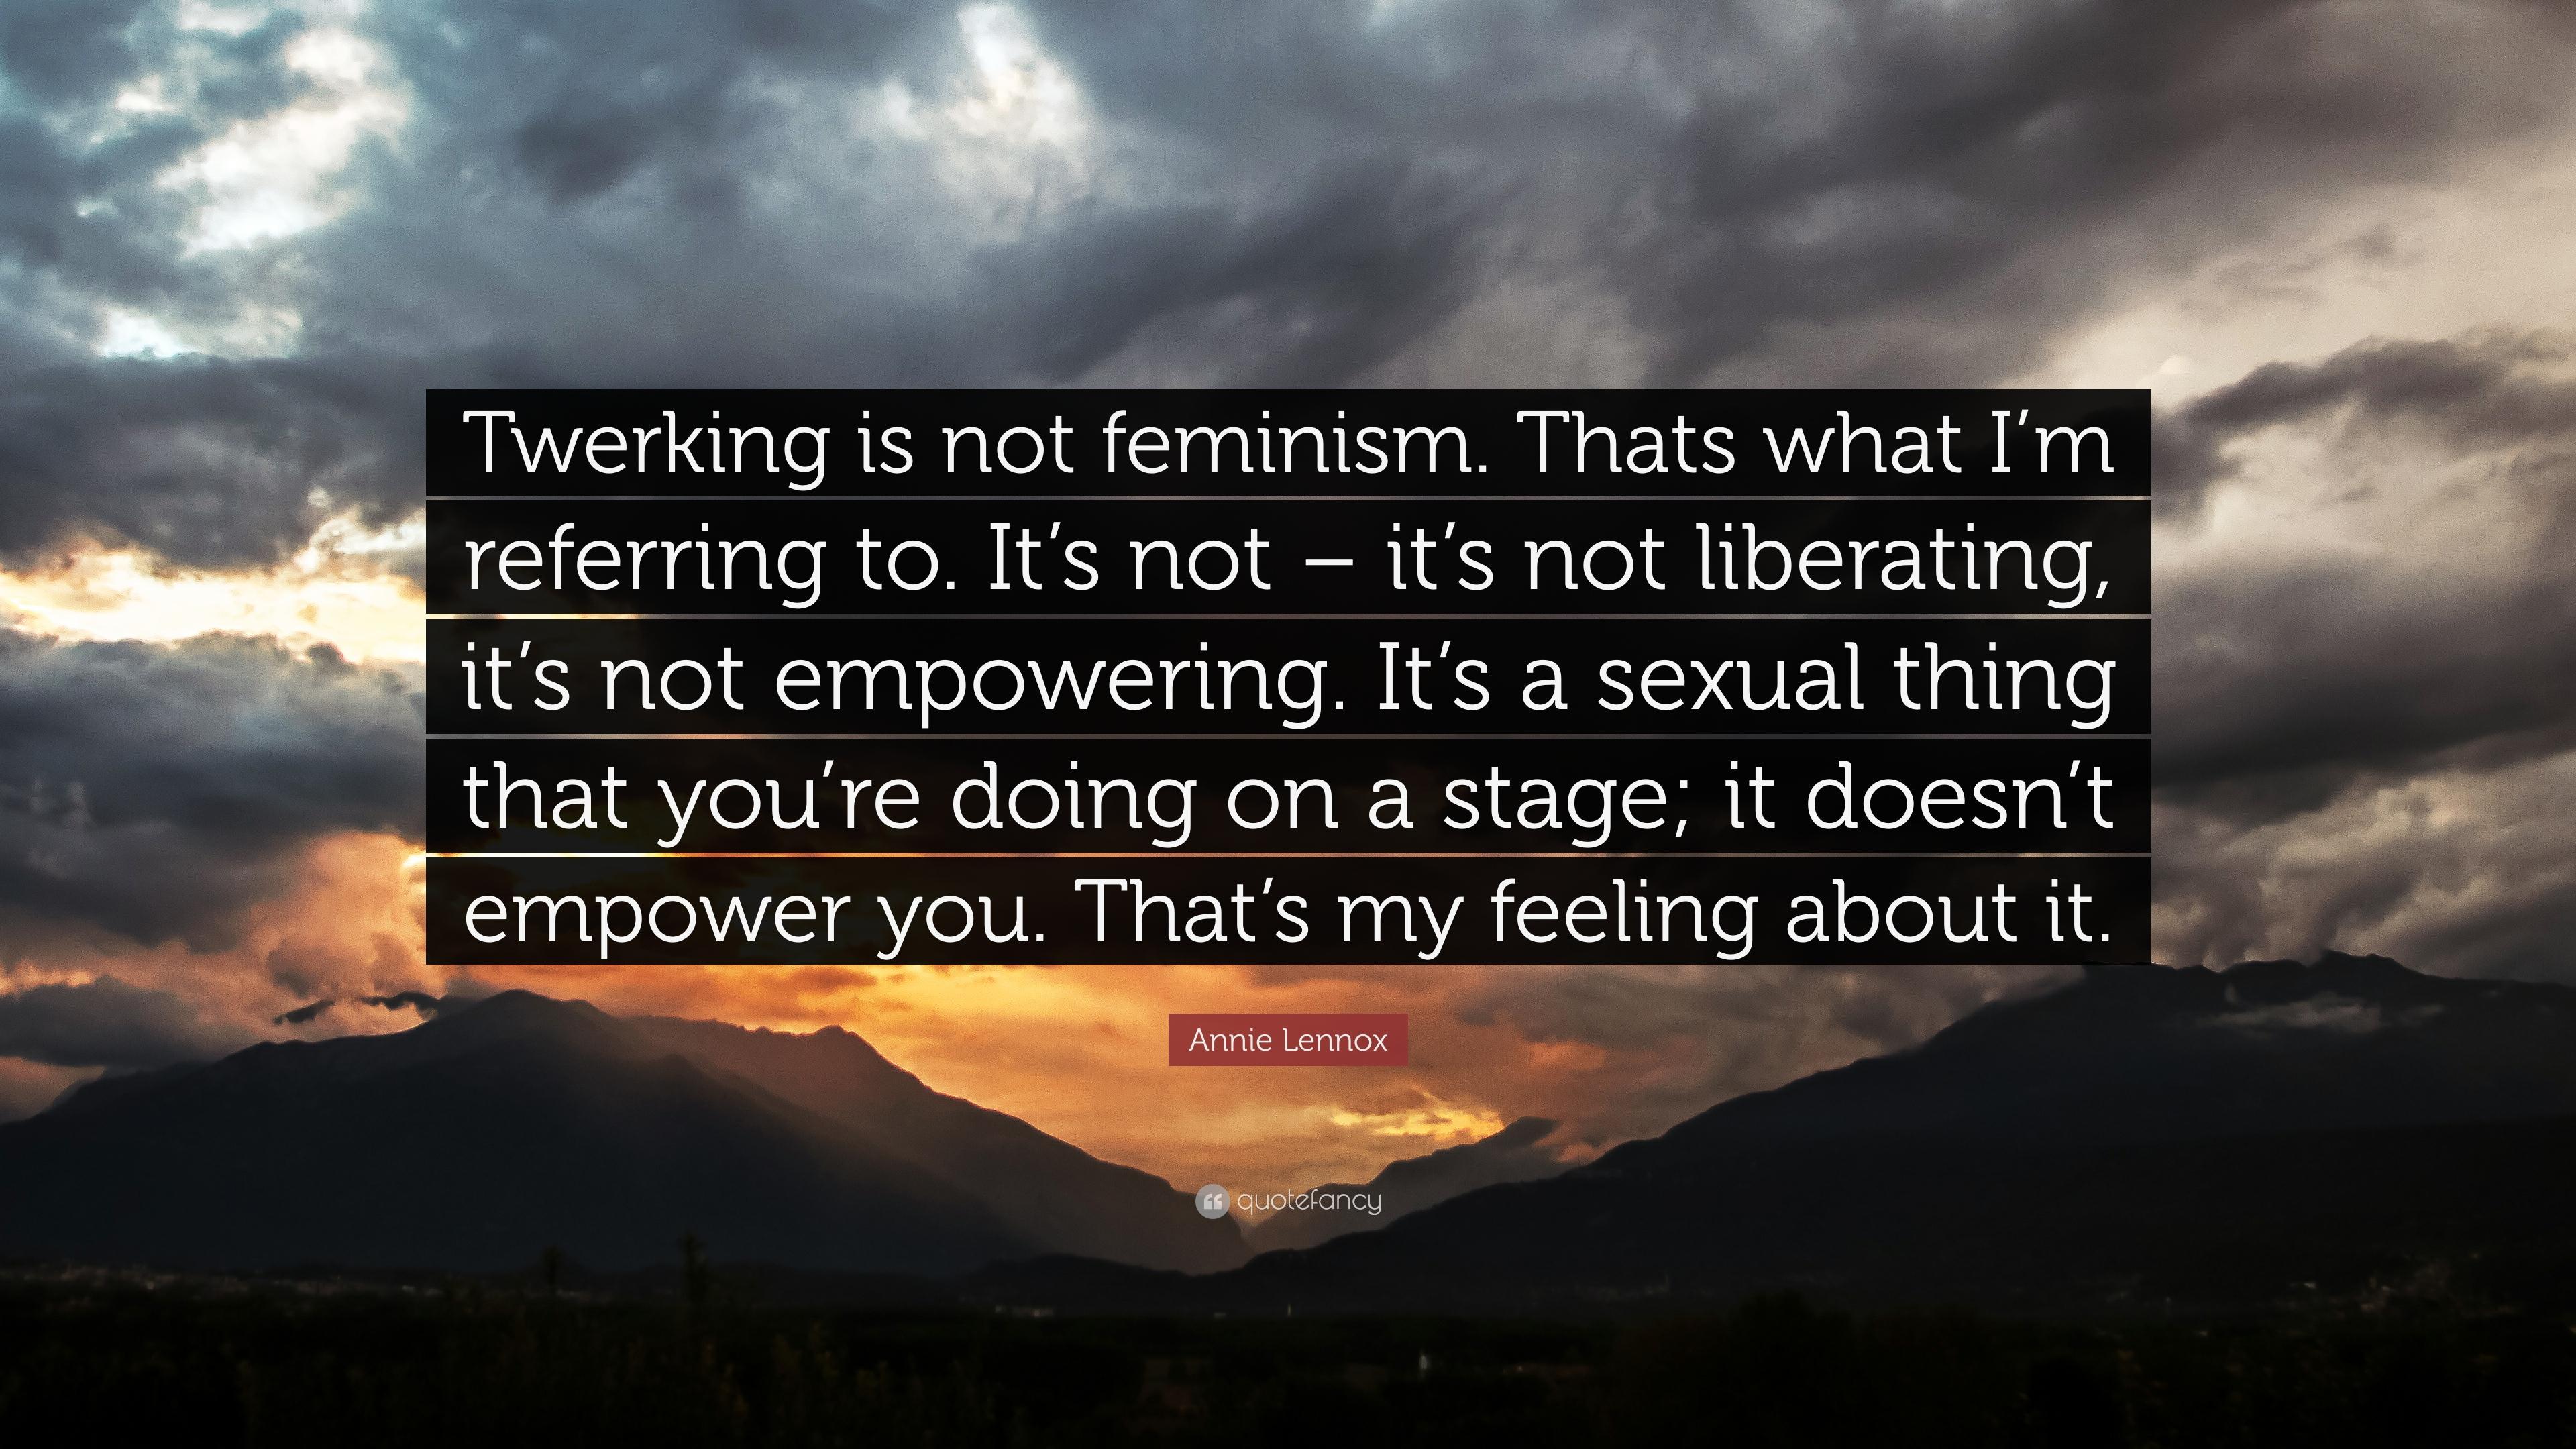 Annie Lennox Quote: “Twerking is not feminism. Thats what I'm